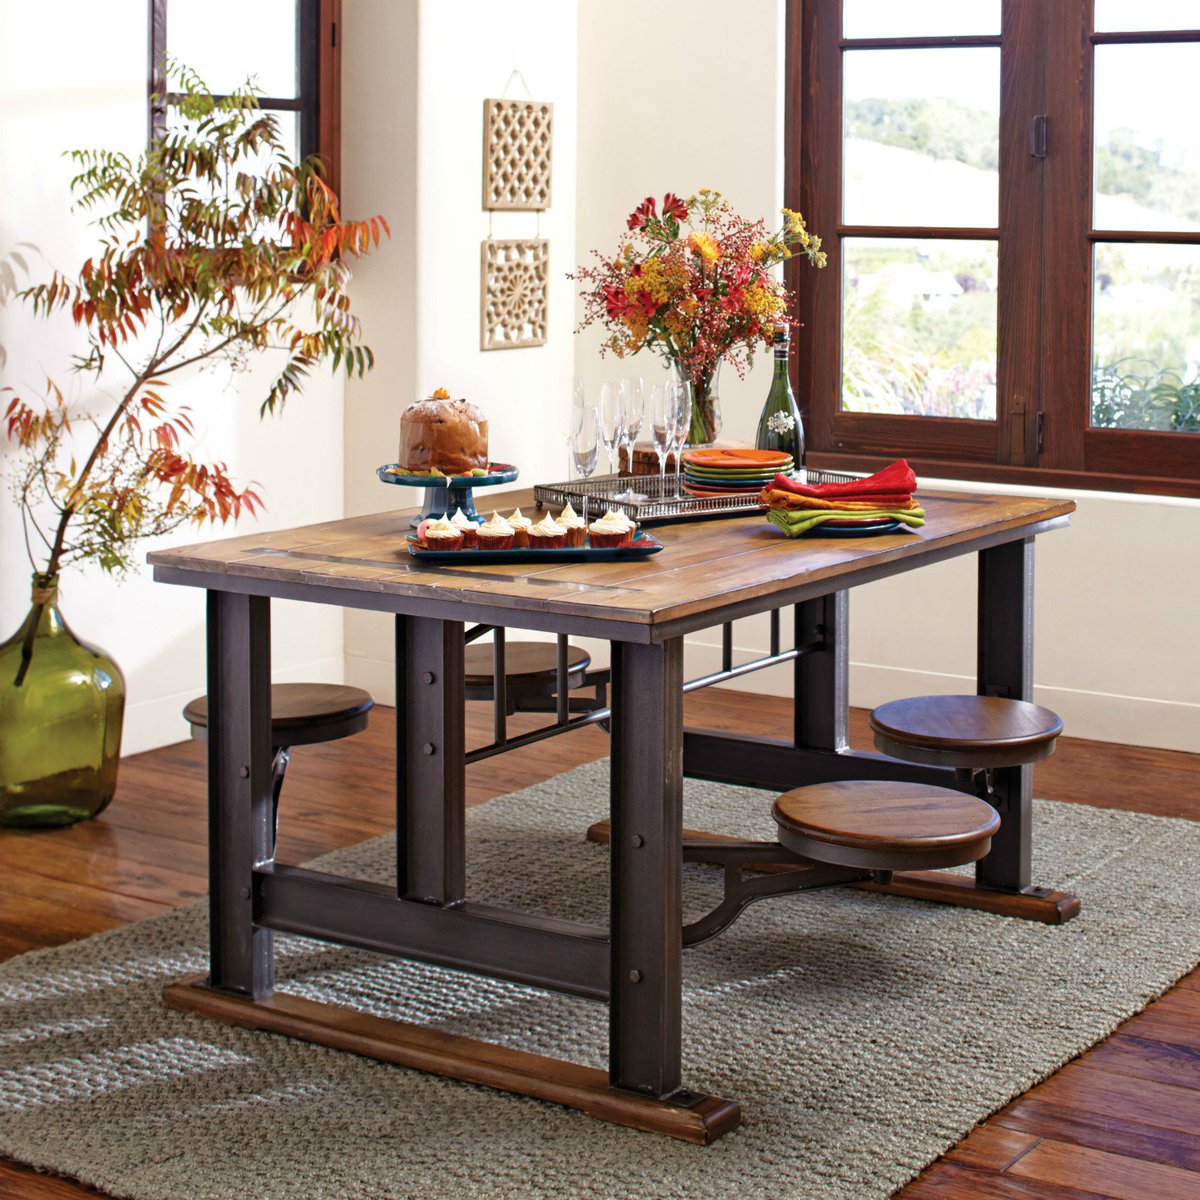 World Market On Twitter Dining Room Furniture That Reflects Your